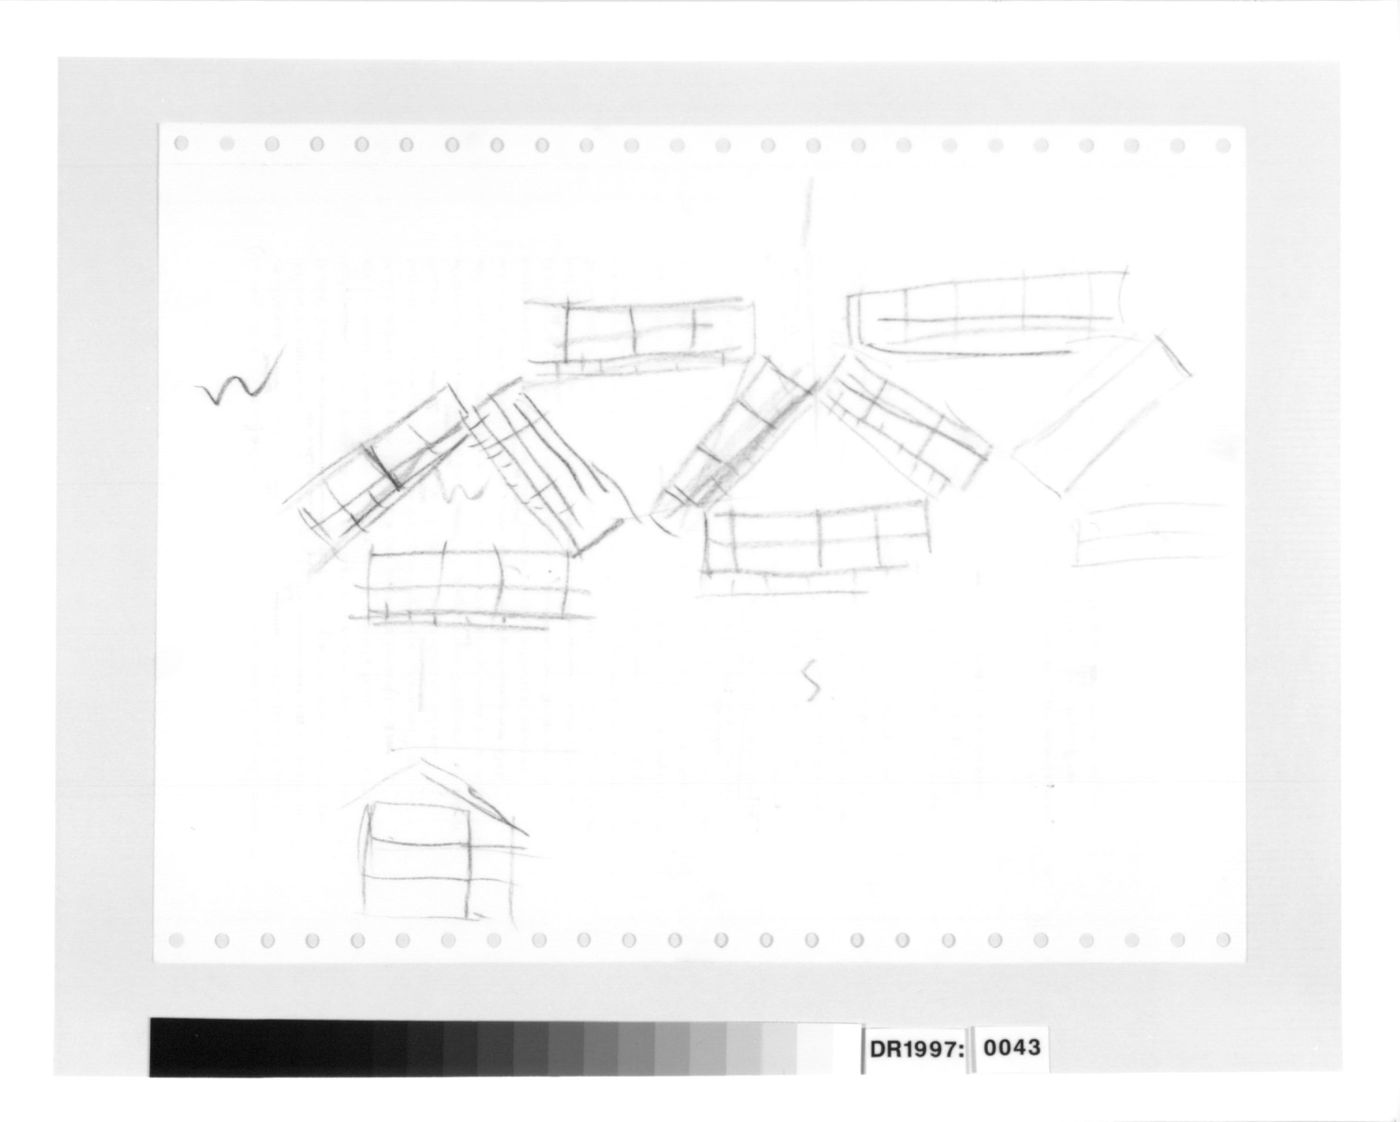 Housing Pilotengasse, Vienna-Aspern: Conceptual sketches, including siteplans, plans, elevations, and perspectives